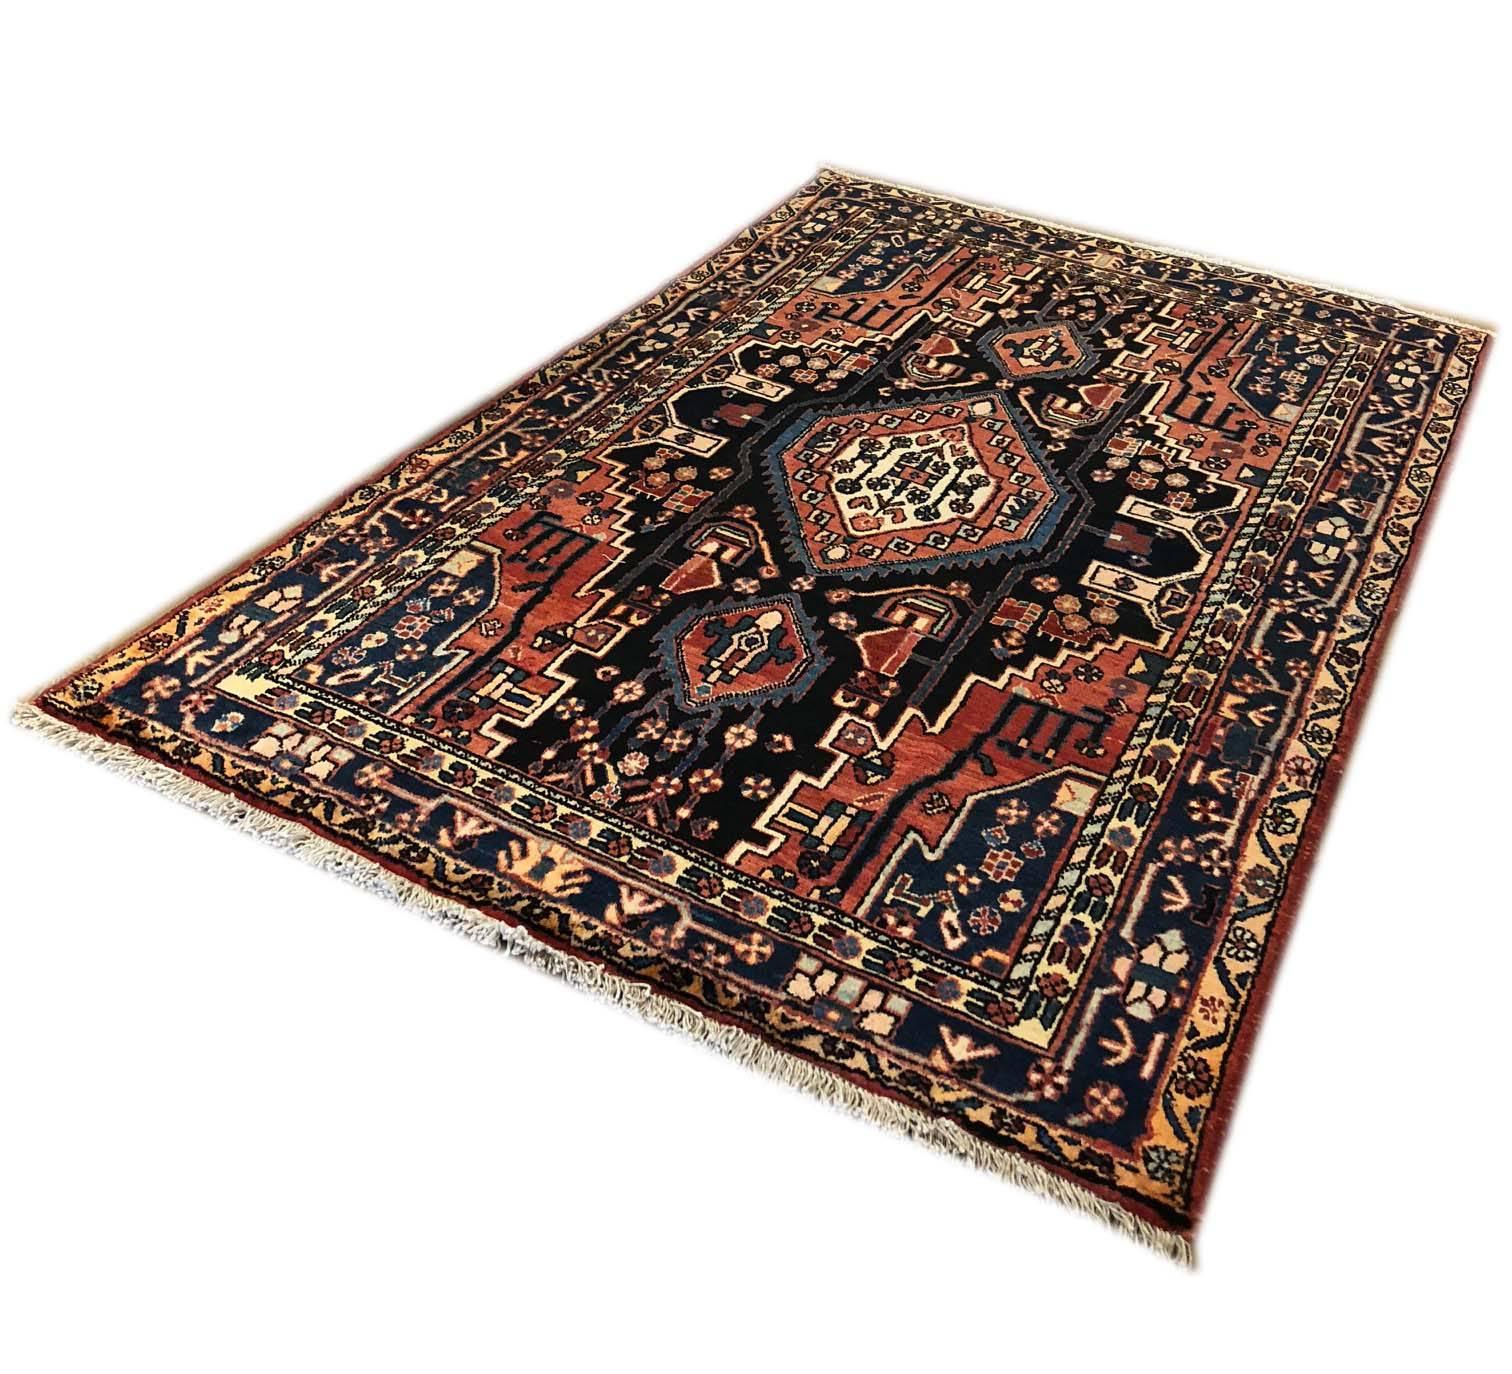 This piece is Persian Hamadan with wool pile and cotton foundation. Persian Hamadan rugs are easily recognized with their pattern and color combinations. The colors in this piece is indigo blue, cream, light blue and rose. This rug has a very